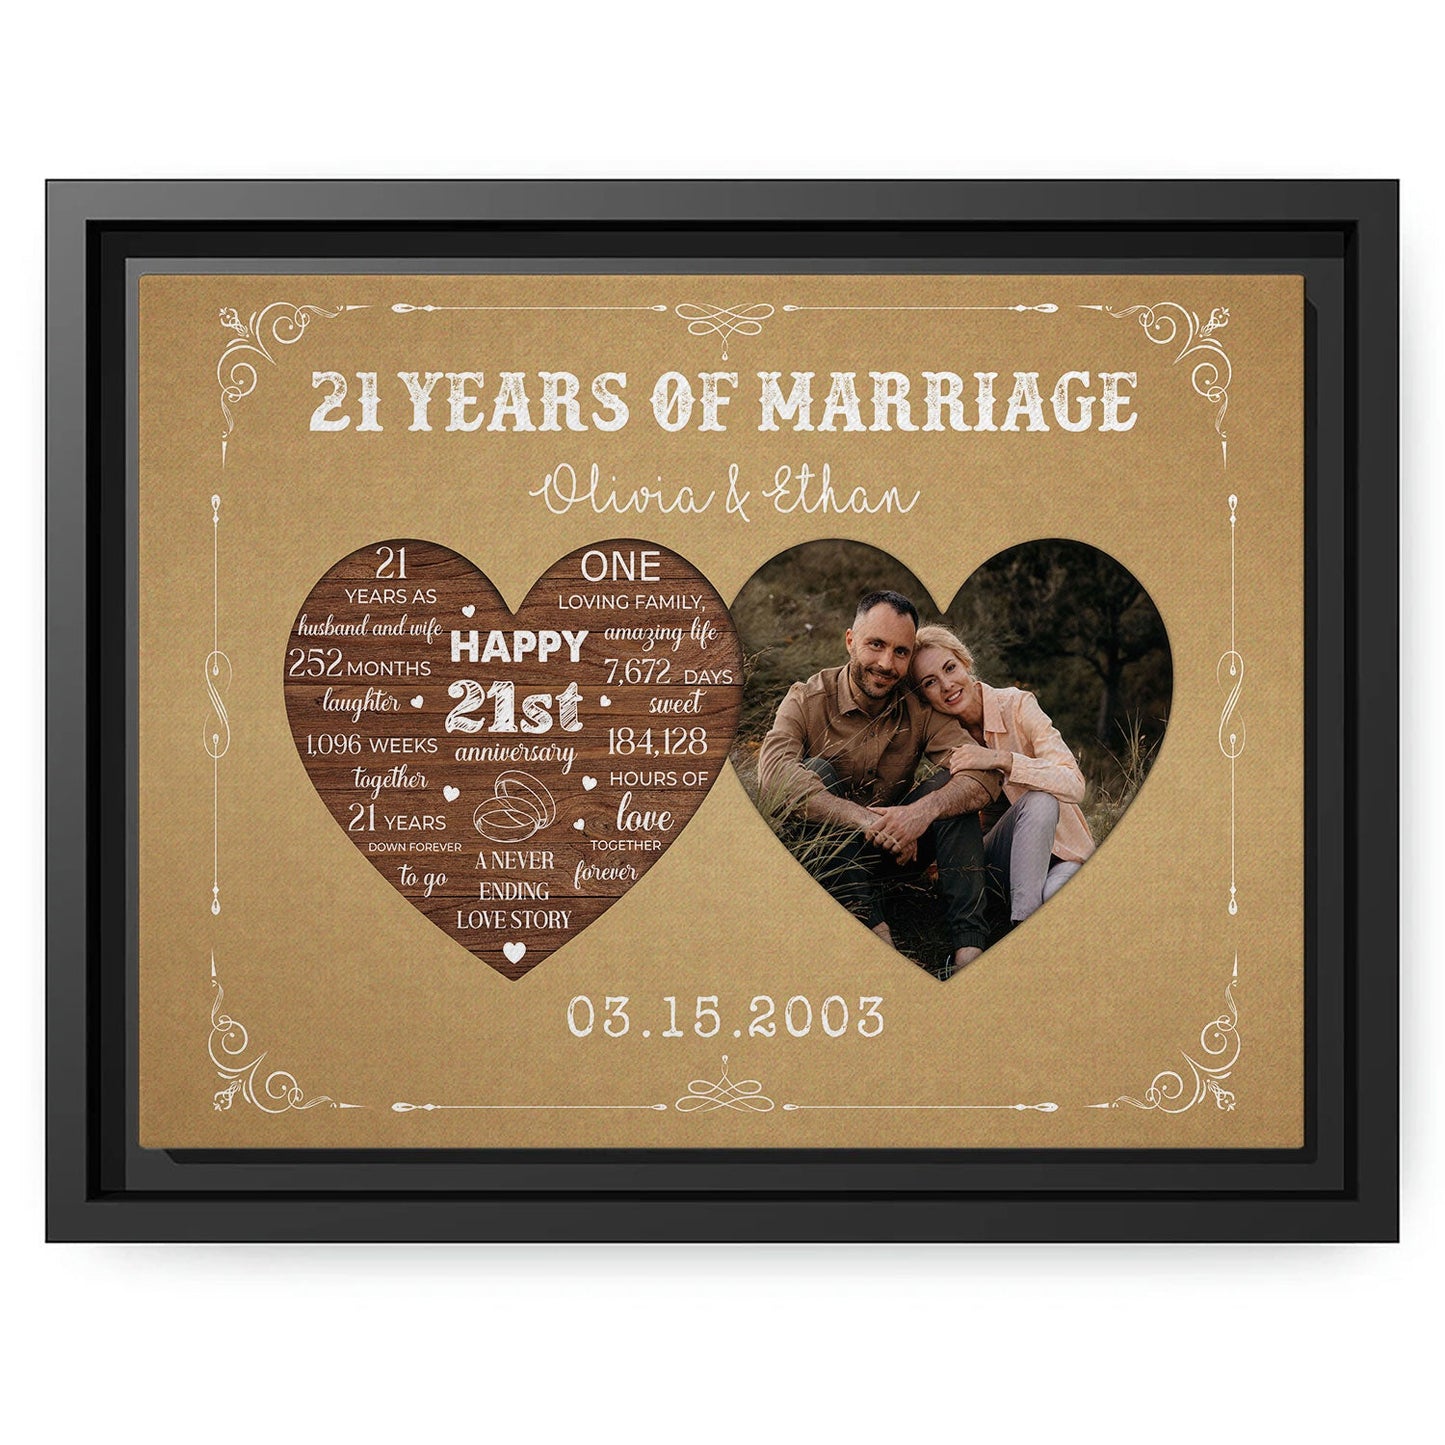 21 Years Of Marriage - Personalized 21 Year Anniversary gift For Parents, Husband or Wife - Custom Canvas Print - MyMindfulGifts